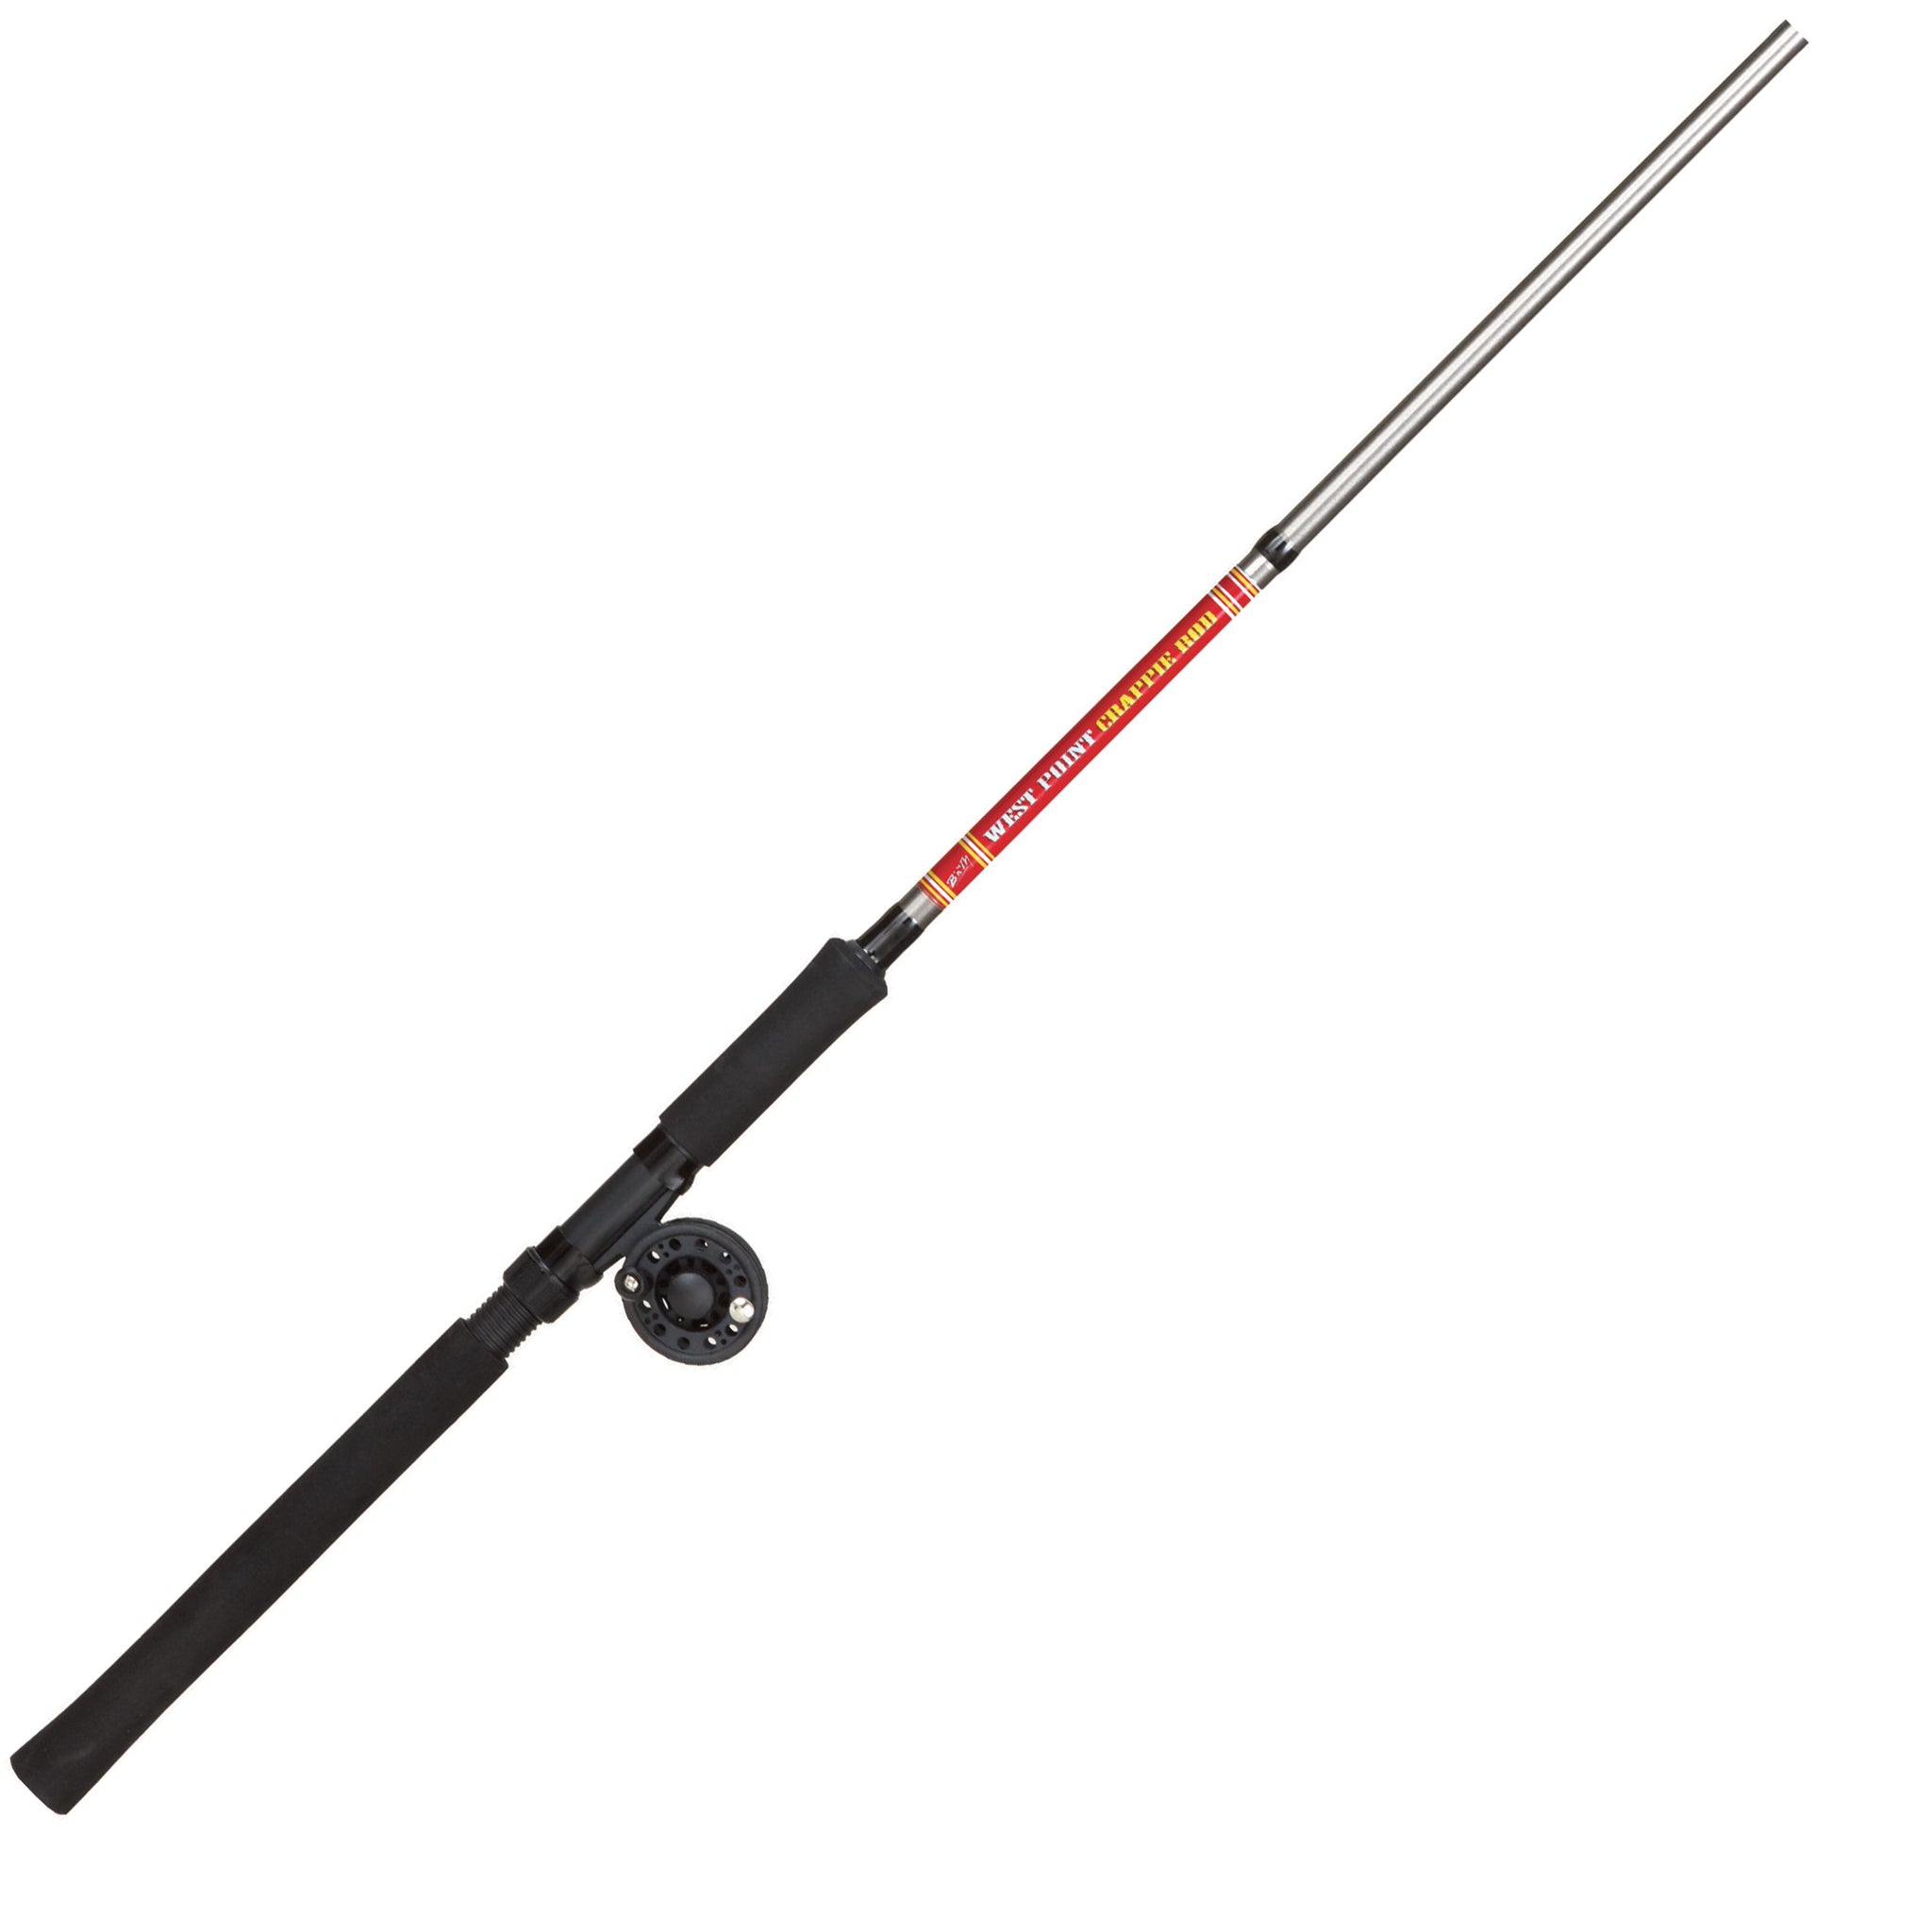 B&M West Point Crappie Jig Pole, 10', 2 Pc, 6 Guides Tip WPCR10